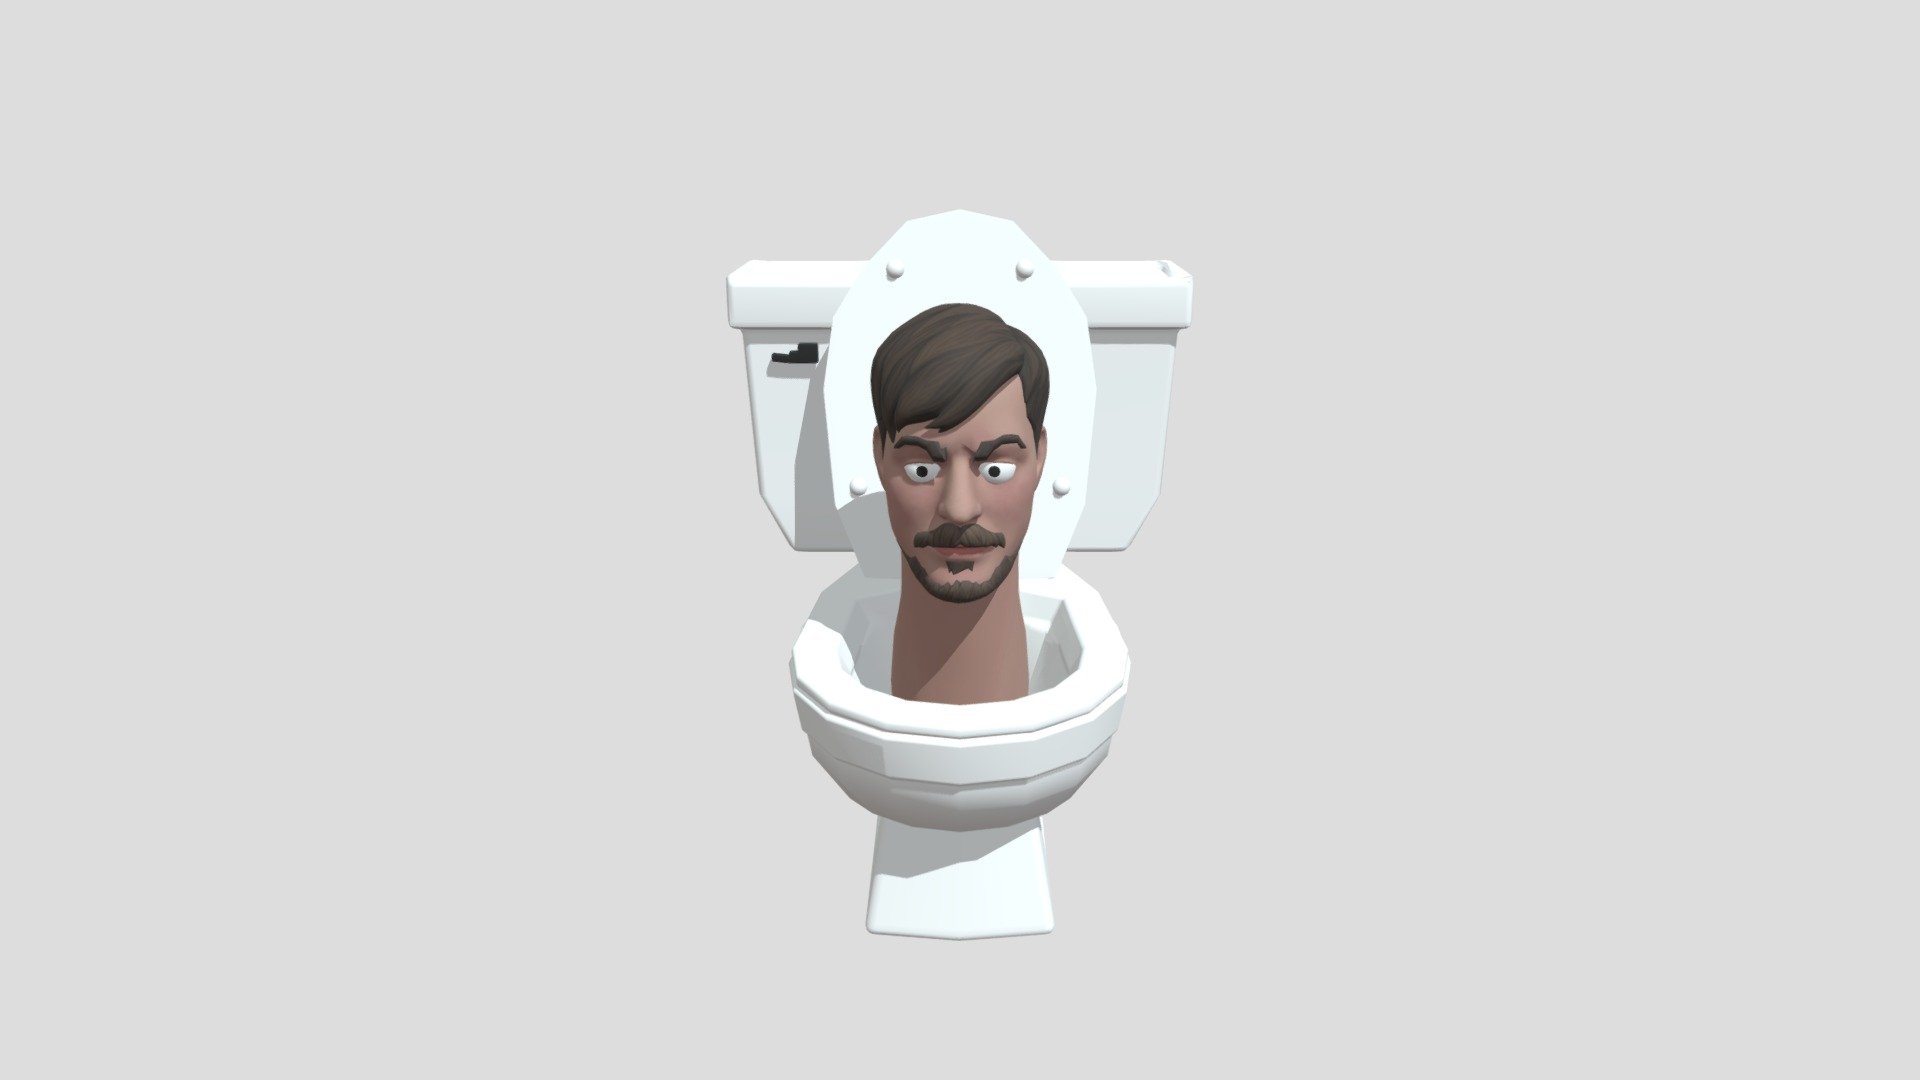 I created a 3D model of the Skibidi toilet MrBeast, which is a horror and fun character. The face inside the toilet can be changed.

You can use it in your games or videos and get millions of views on youtube.

Download Link:
https://www.cgtrader com/3d-models/character/sci-fi-character/skibidi-toilet-mrbeast

You can download it from the link by putting a dot in front of com !(.com)! - Skibidi Toilet MrBeast - 3D model by snisa 3d model